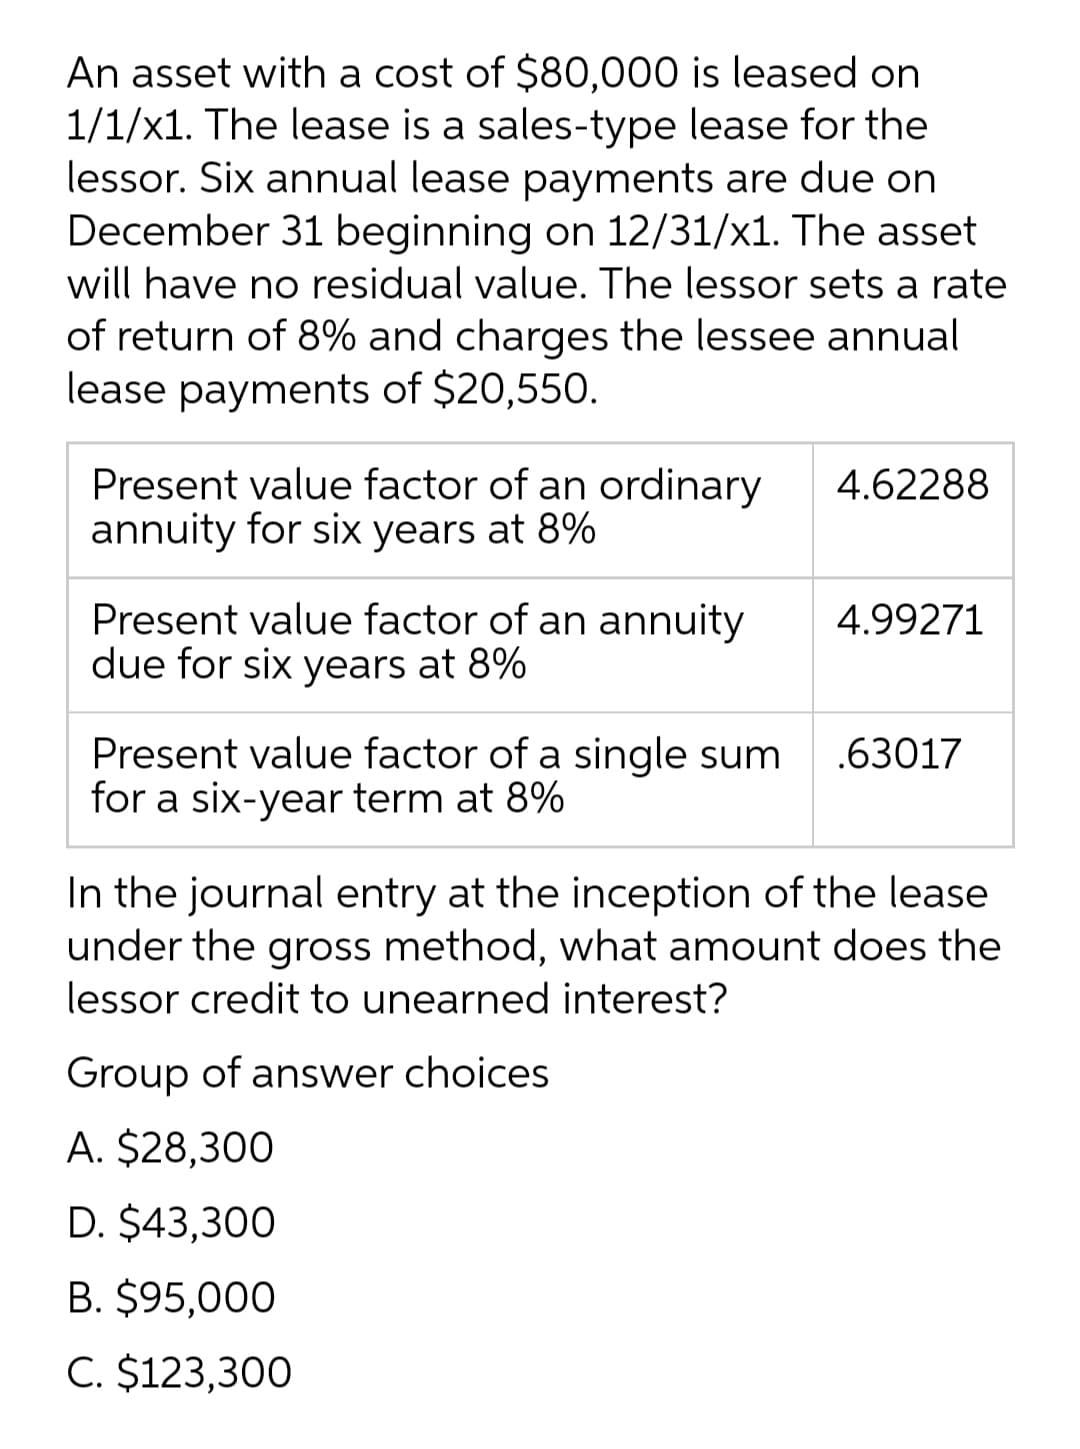 An asset with a cost of $80,000 is leased on
1/1/x1. The lease is a sales-type lease for the
lessor. Six annual lease payments are due on
December 31 beginning on 12/31/x1. The asset
will have no residual value. The lessor sets a rate
of return of 8% and charges the lessee annual
lease payments of $20,550.
Present value factor of an ordinary
annuity for six years at 8%
4.62288
Present value factor of an annuity
due for six years at 8%
4.99271
Present value factor of a single sum
for a six-year term at 8%
.63017
In the journal entry at the inception of the lease
under the gross method, what amount does the
lessor credit to unearned interest?
Group of answer choices
A. $28,300
D. $43,300
B. $95,000
C. $123,300
